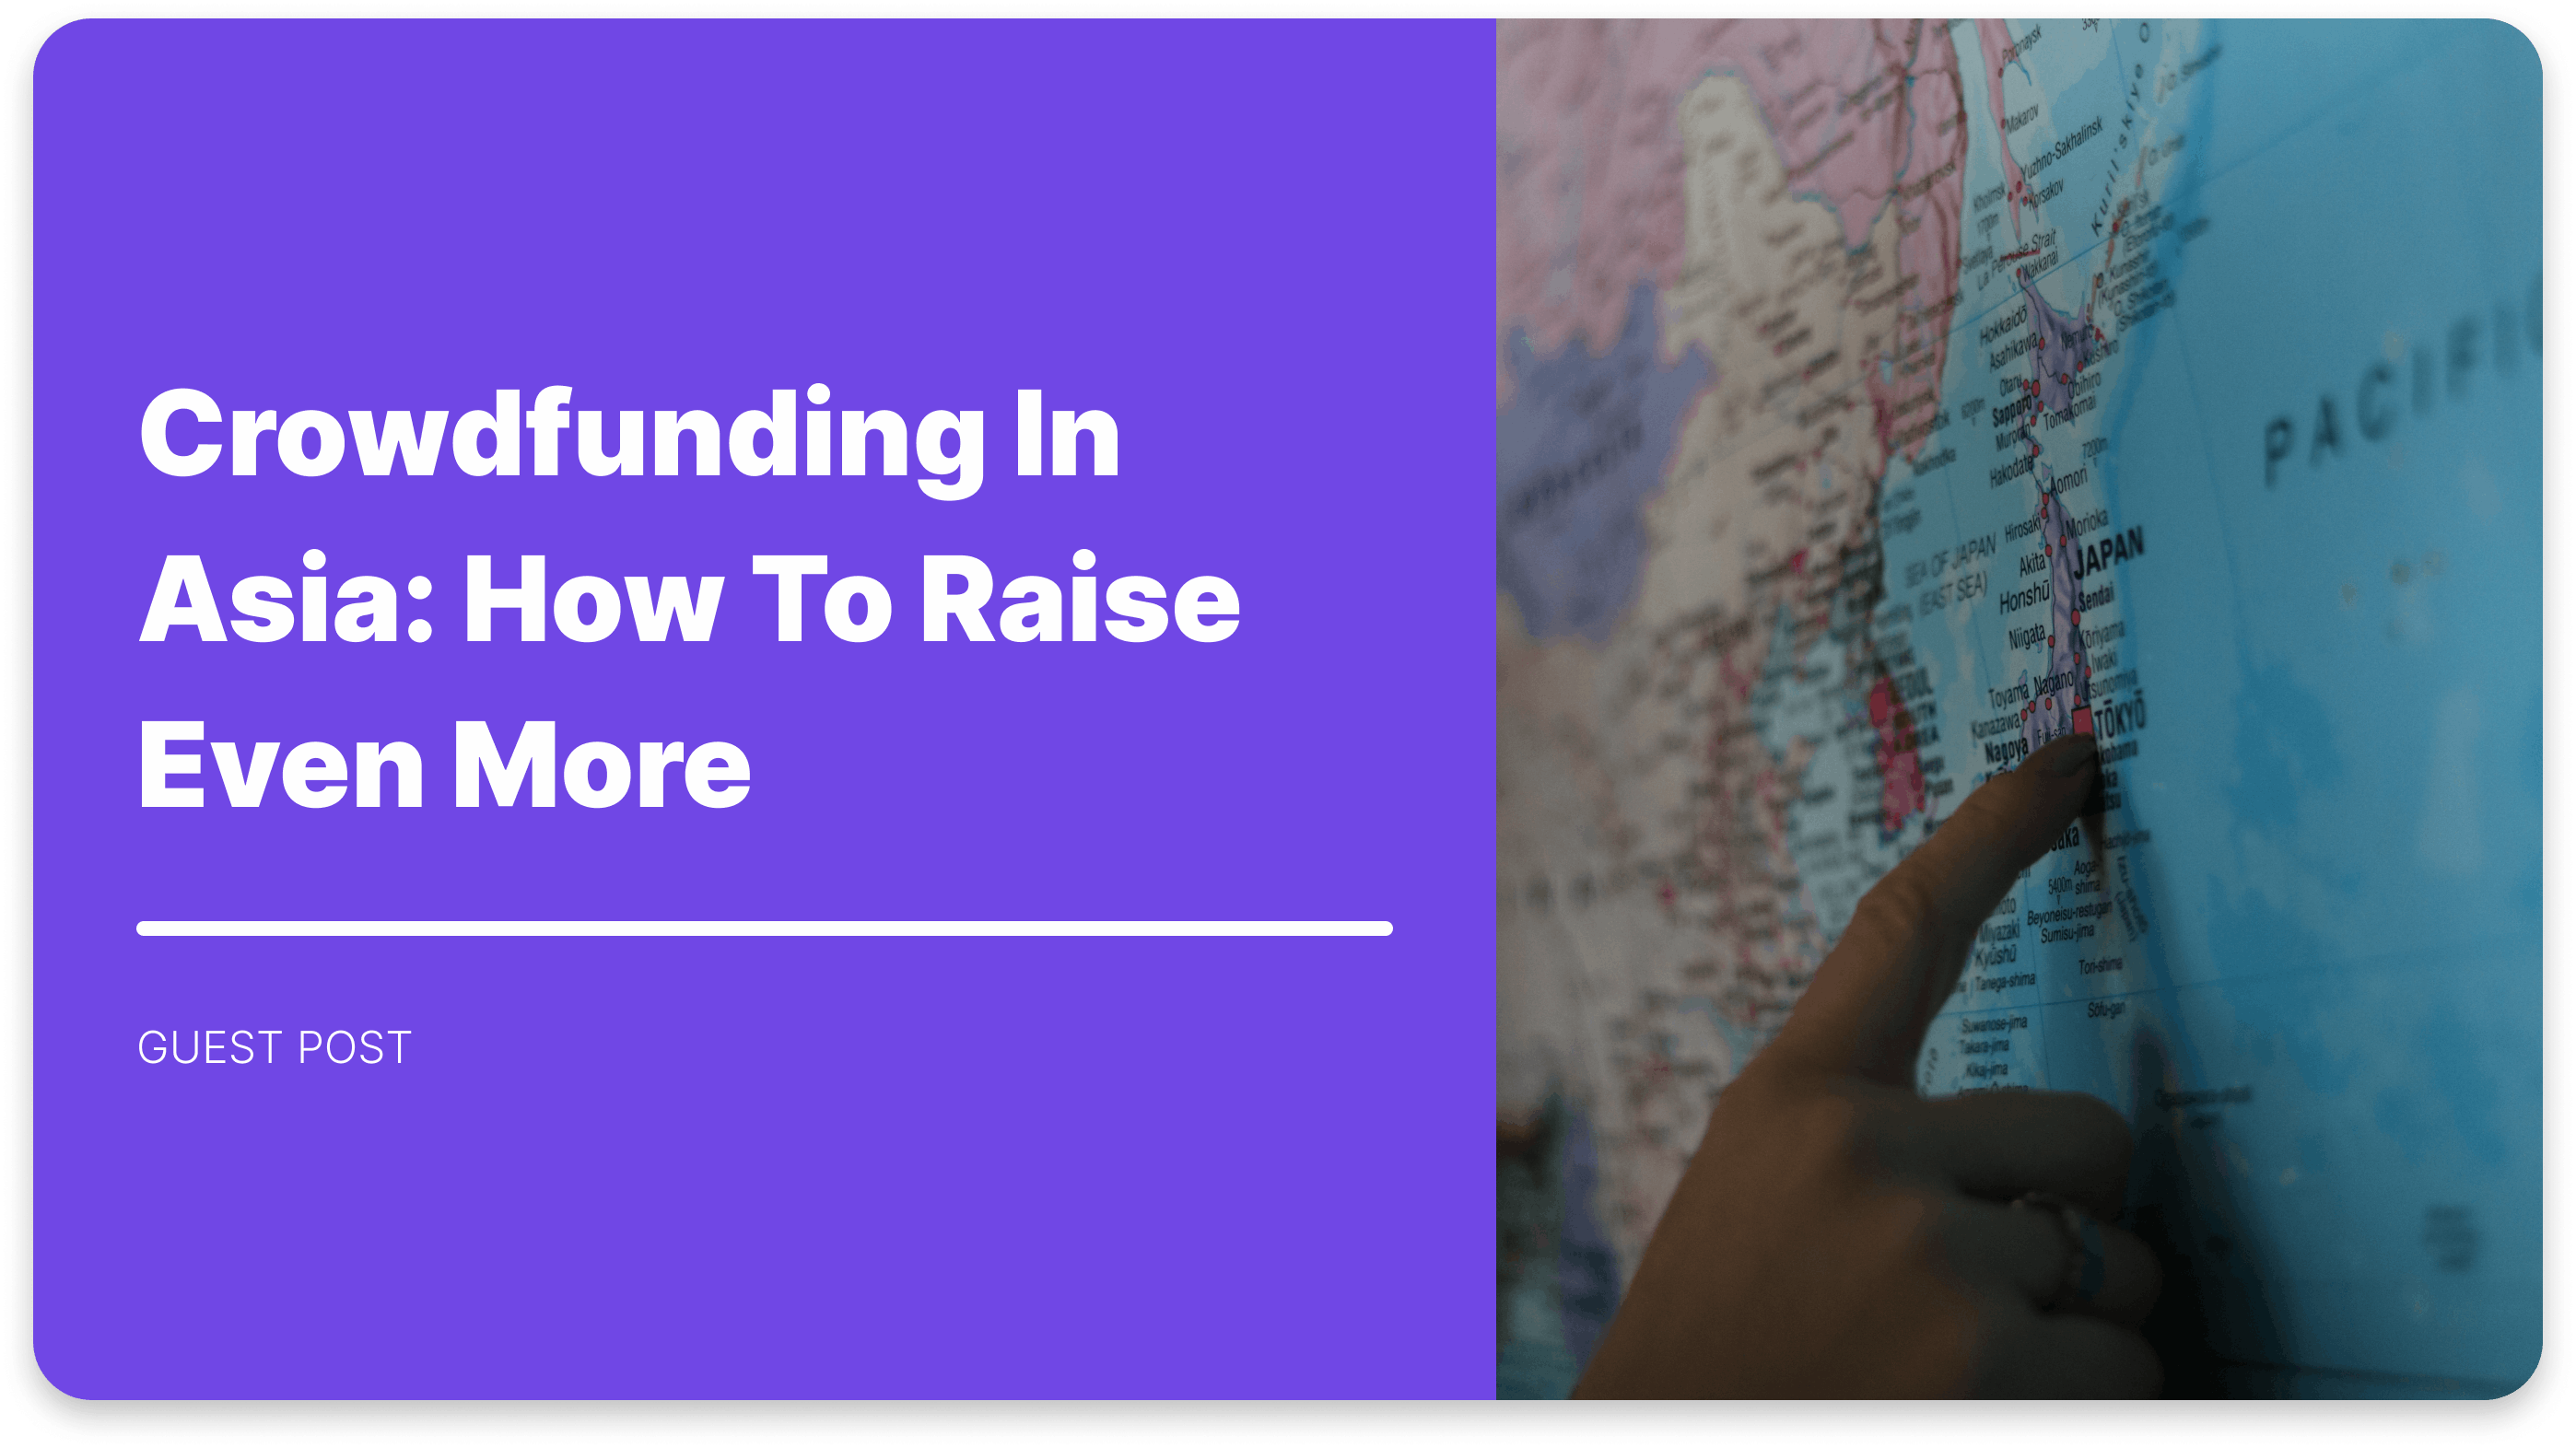 Crowdfunding in Asia: How to Raise Even More